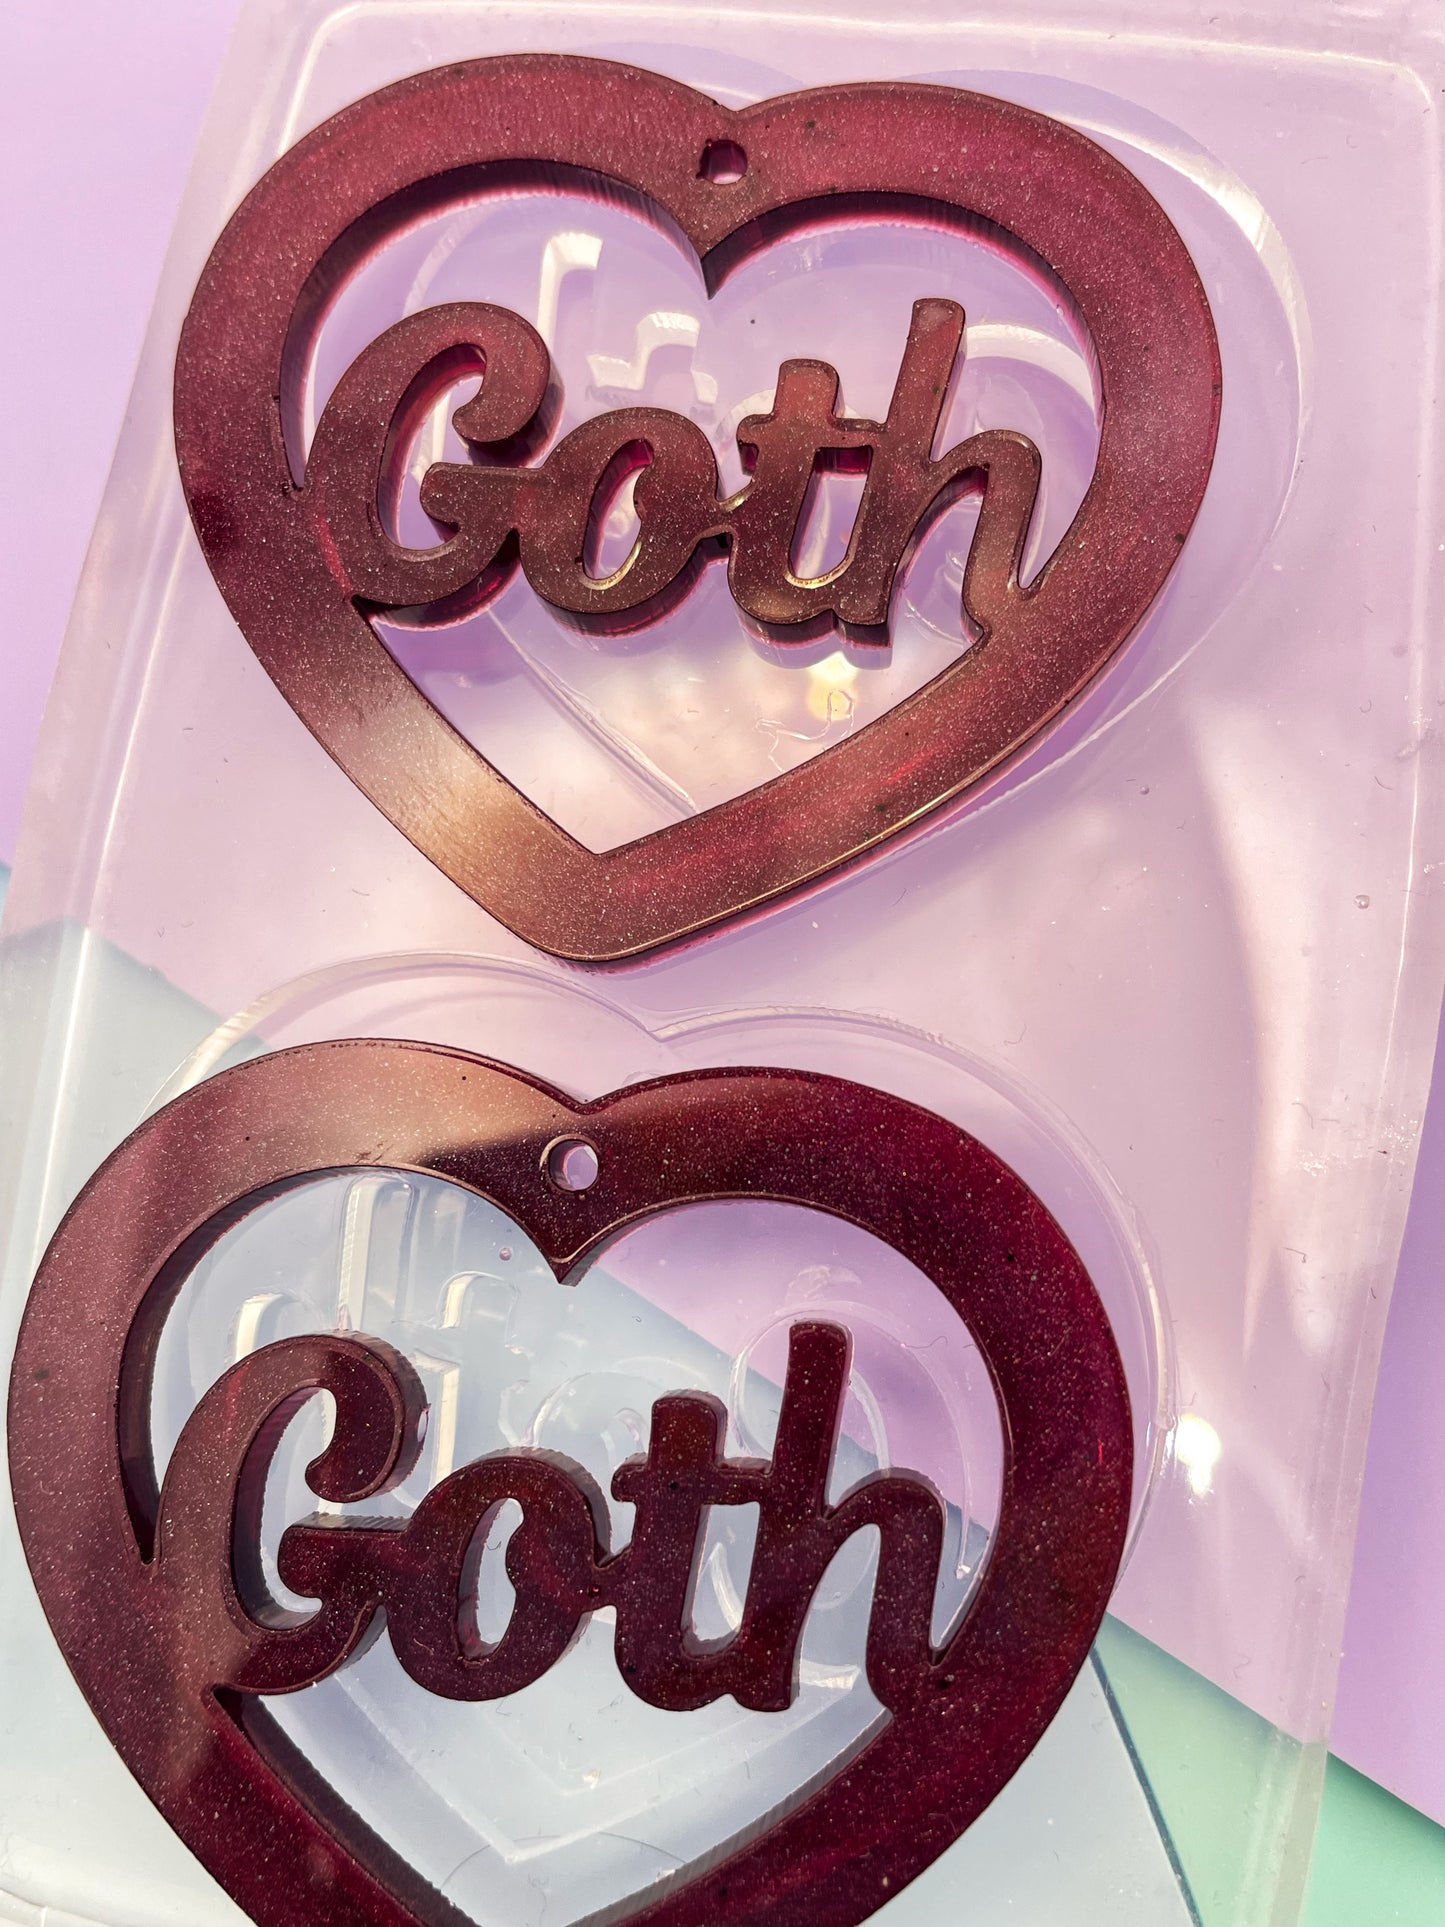 5 cm Goth Slogan Heart Word Dangle Earring Mold Clear Silicone Mould